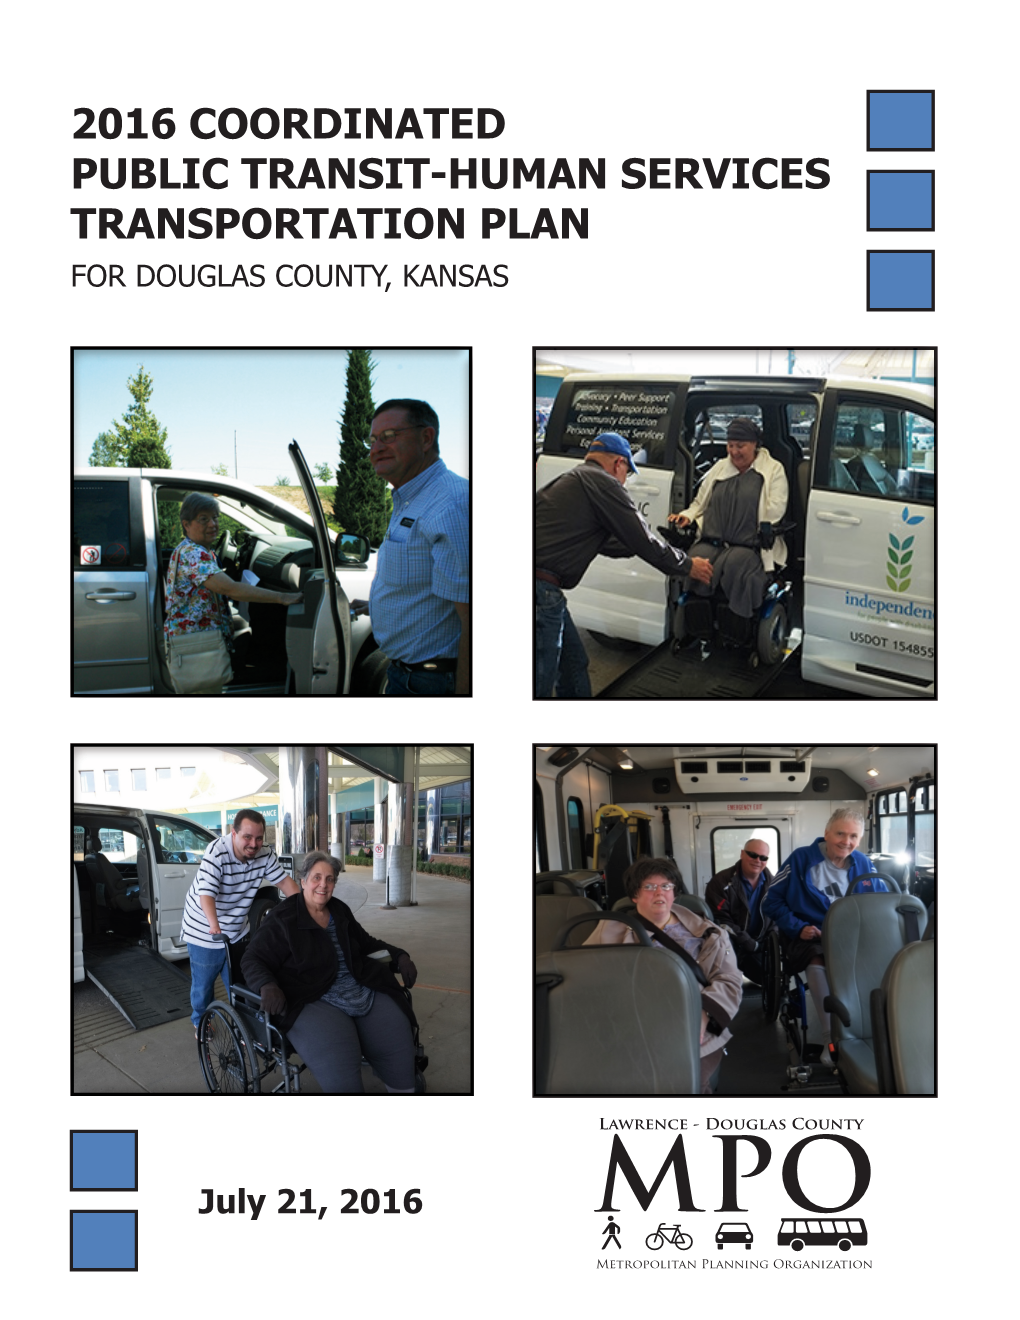 Coordinated Public Transit and Human Services Transportation Plan